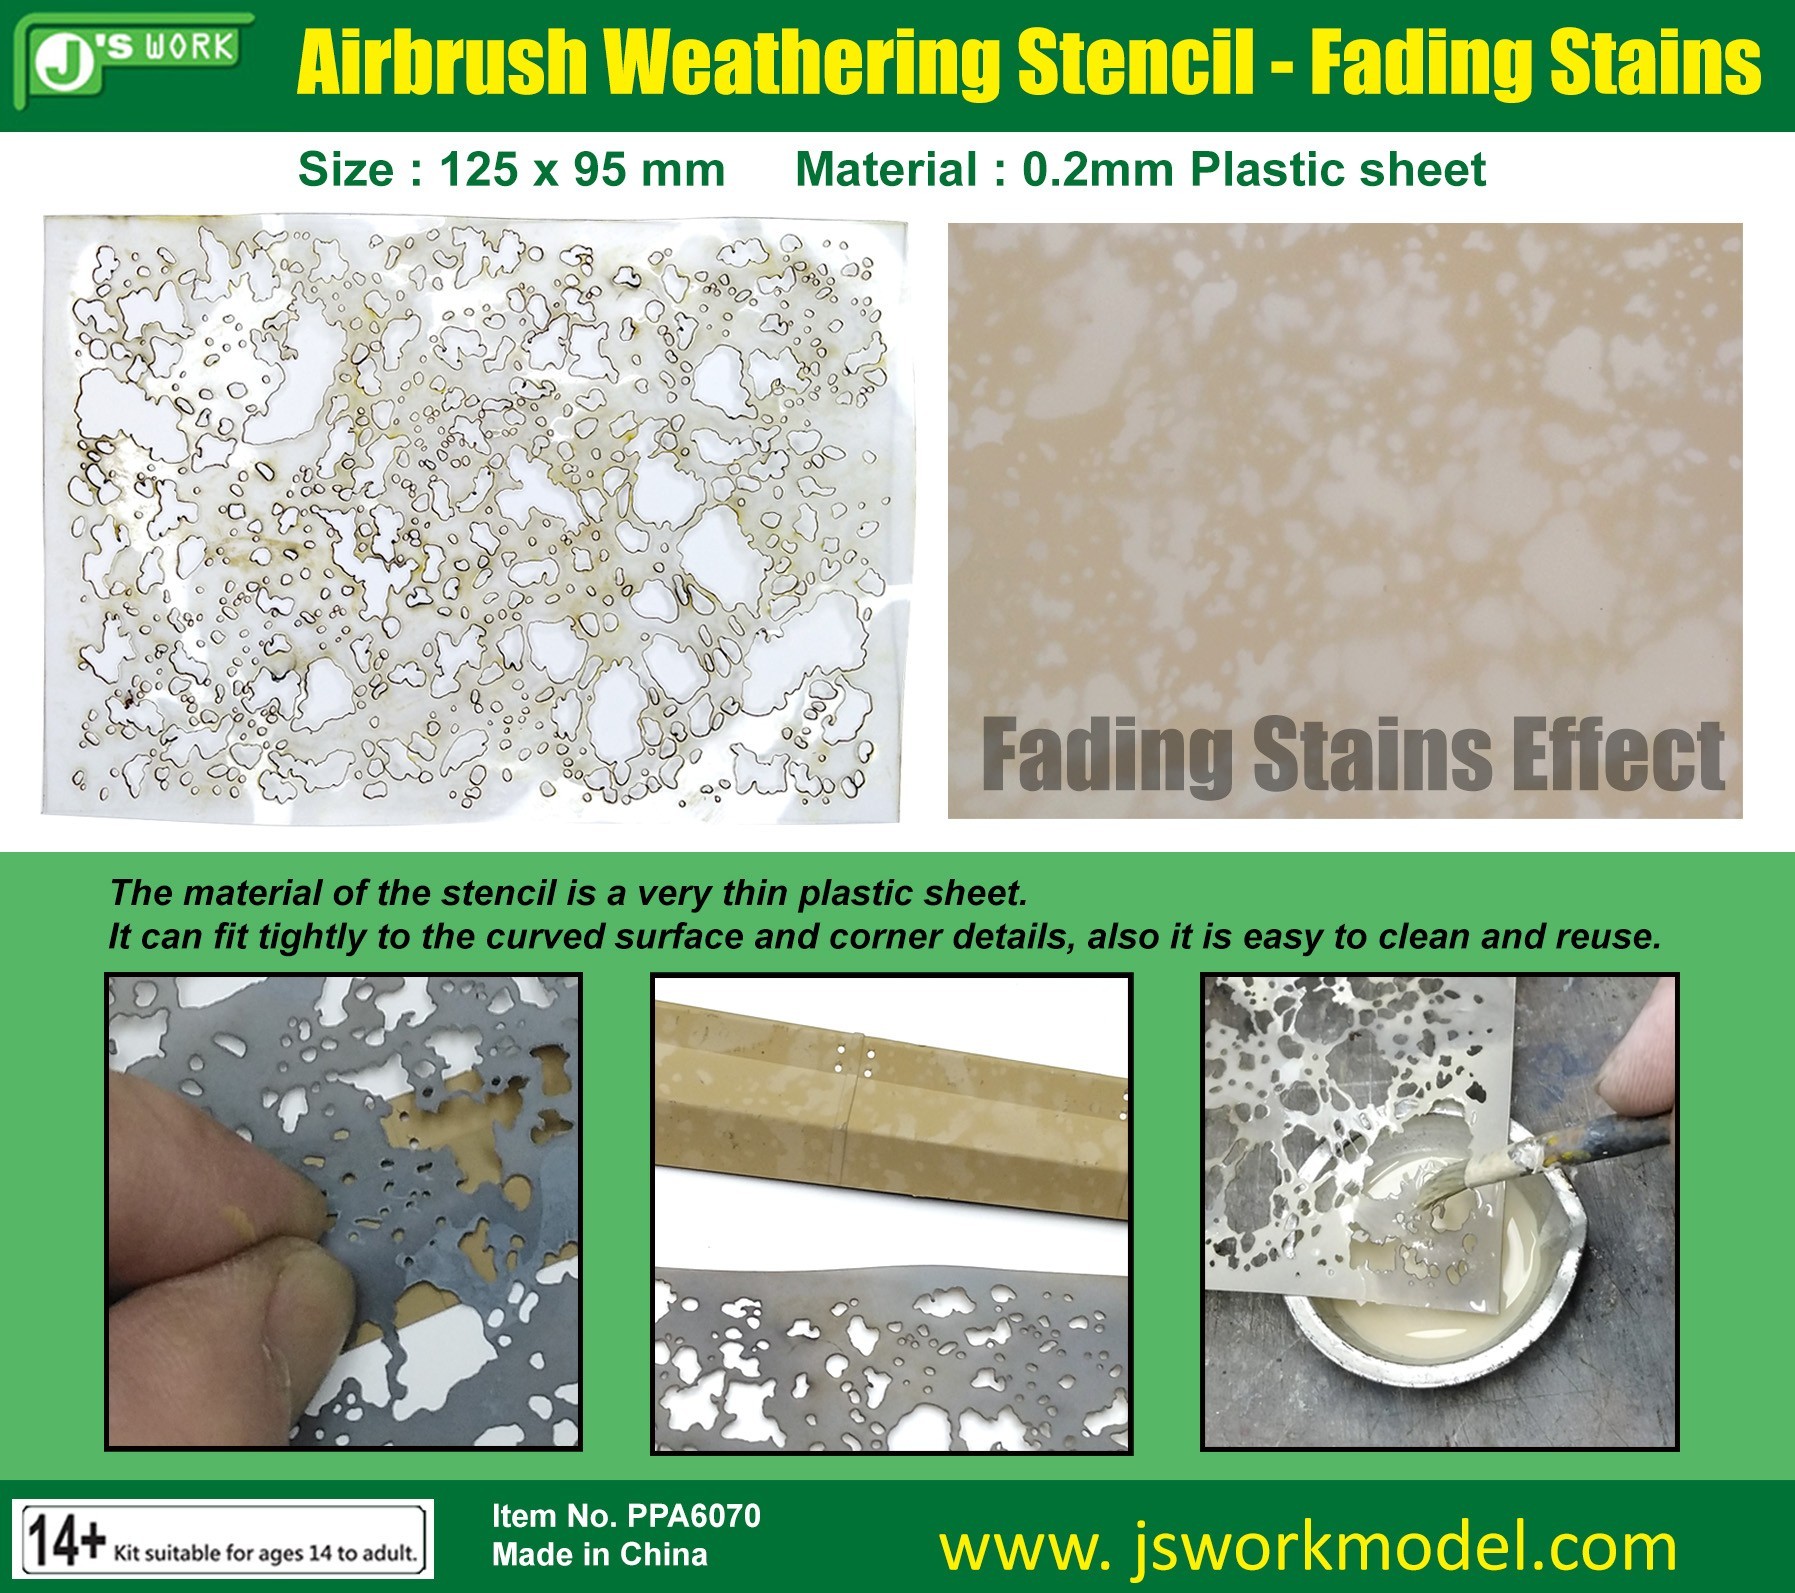 PPA6070 Airbrush Weathering Stencil - Fading Stains